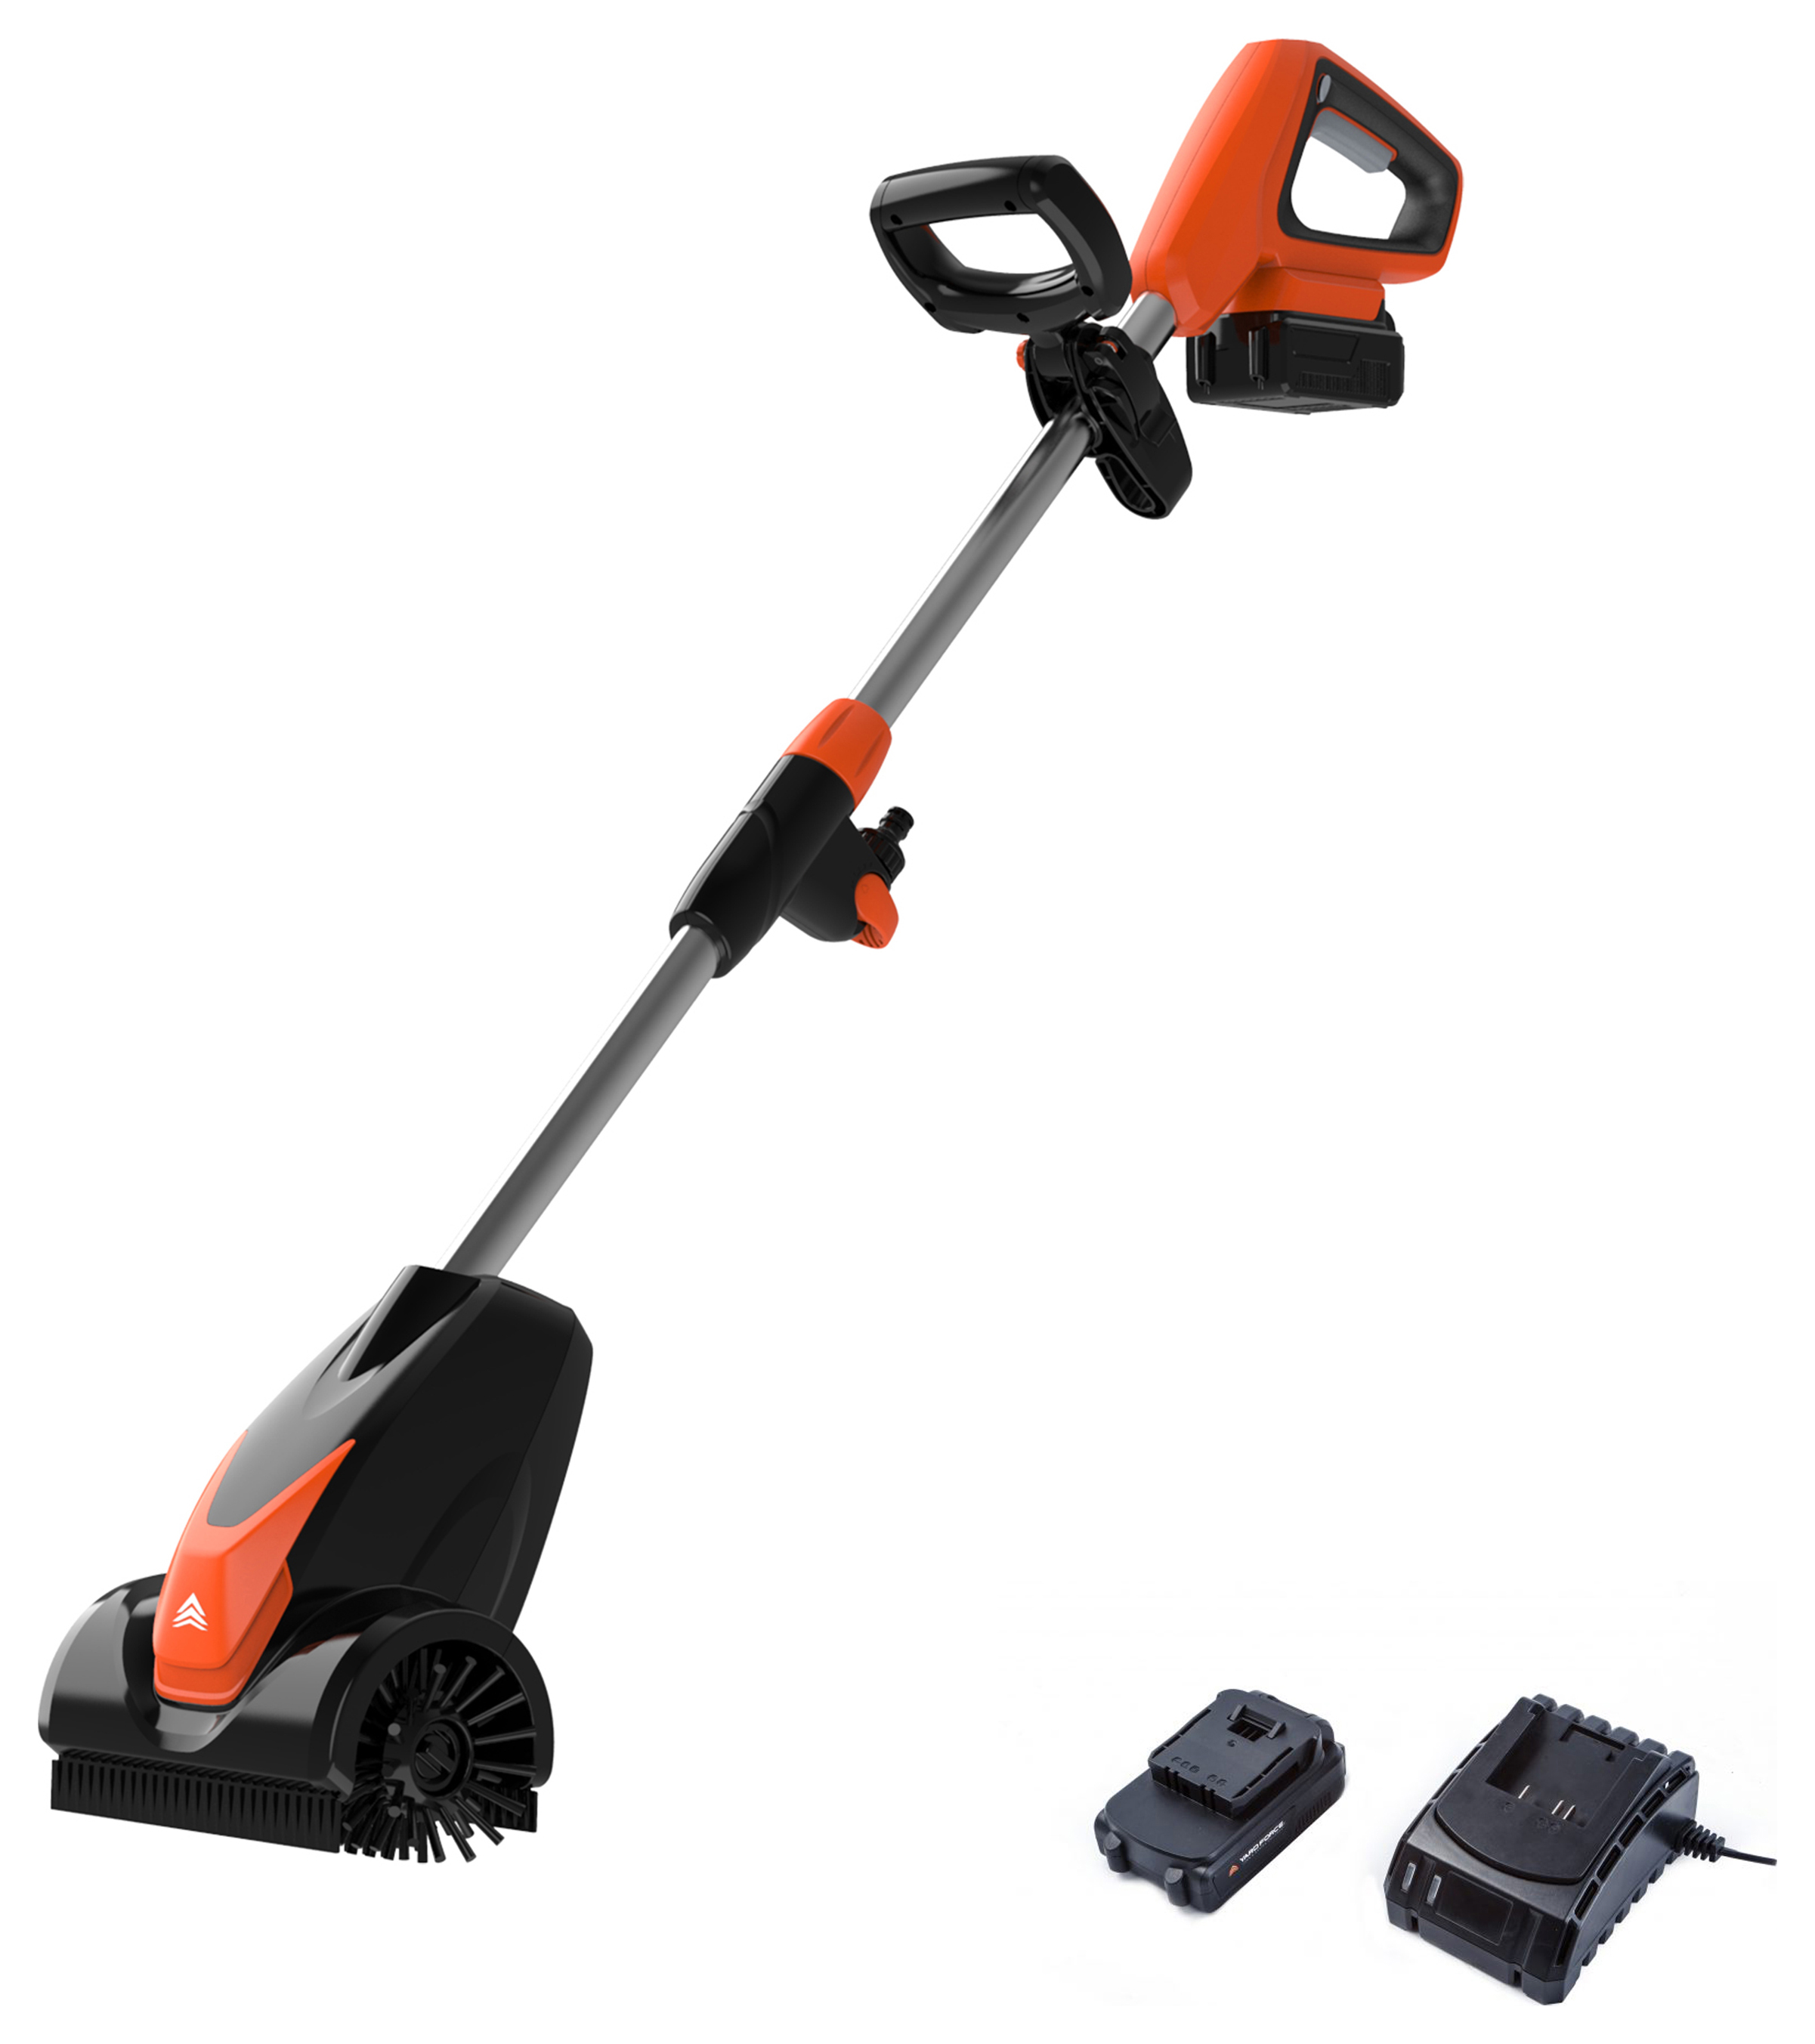 Image of Yard Force 20V Cordless Patio Cleaner